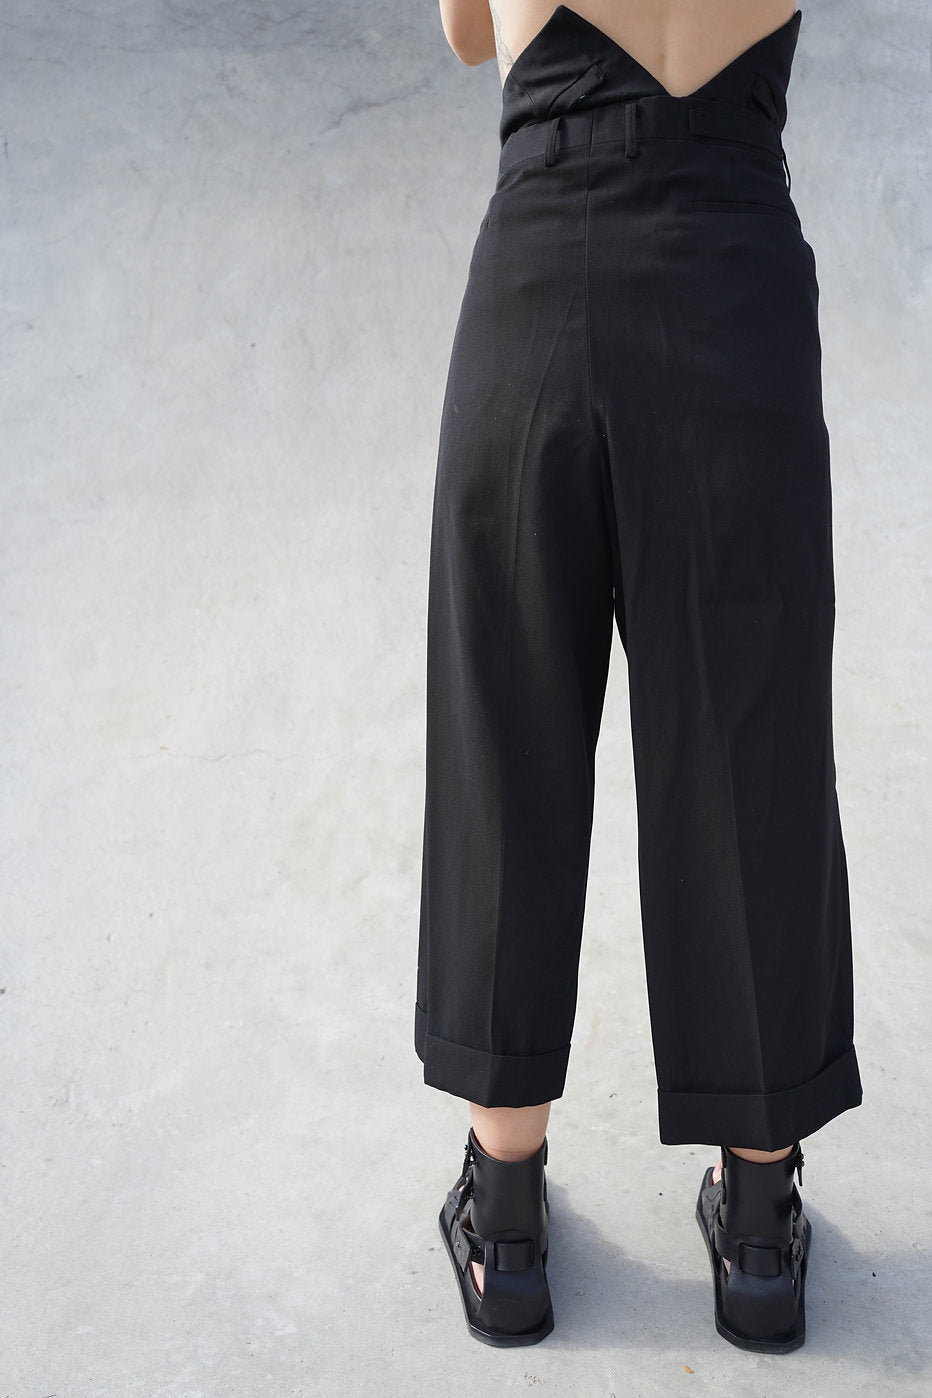 Black cropped pants by Winnie Witt, perfect for a high-end, modern wardrobe.